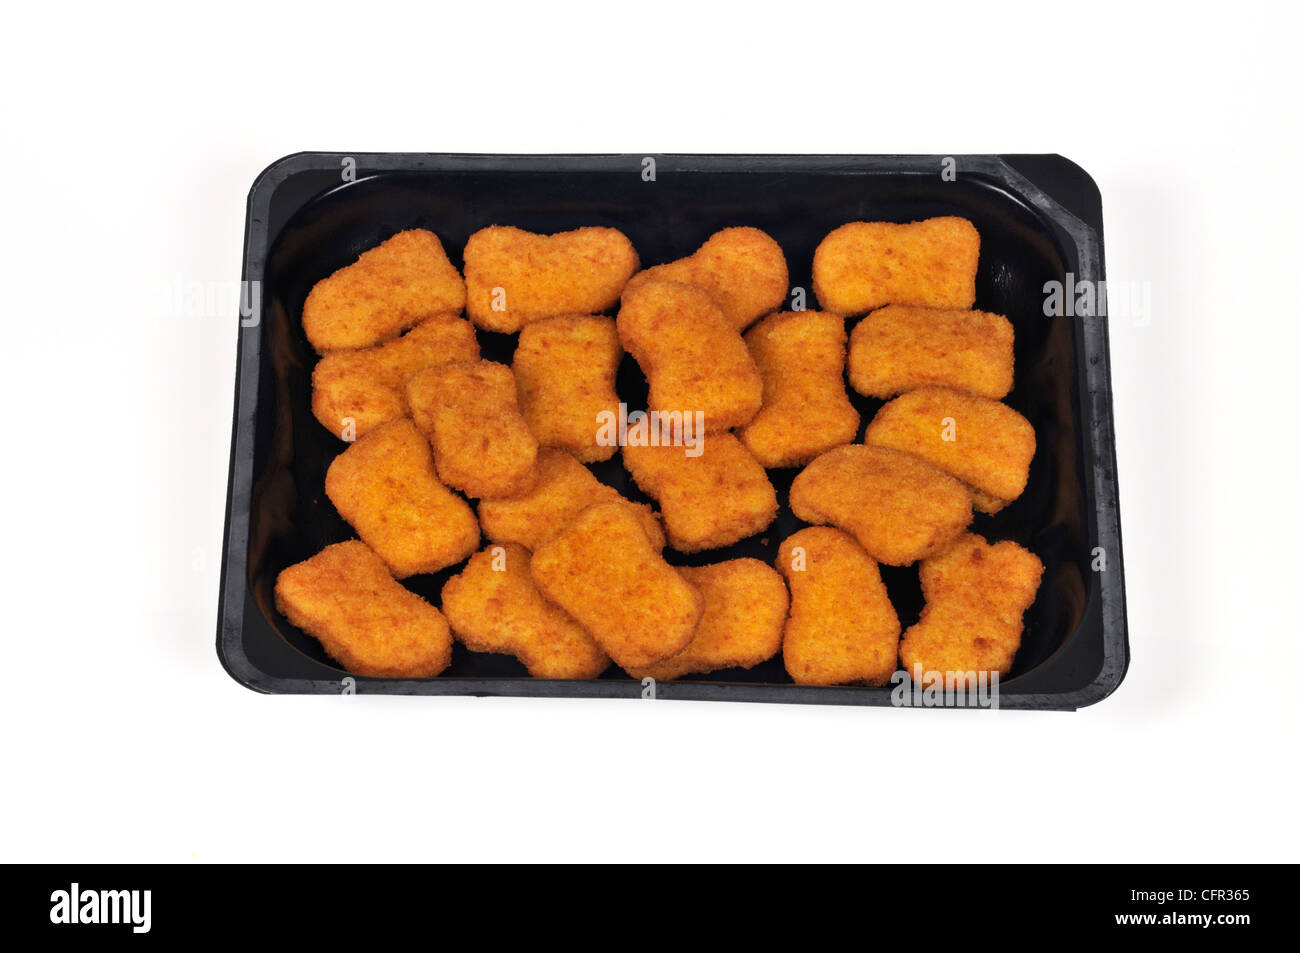 Breaded chicken nuggets in black plastic disposable tray on white background cut out. Stock Photo